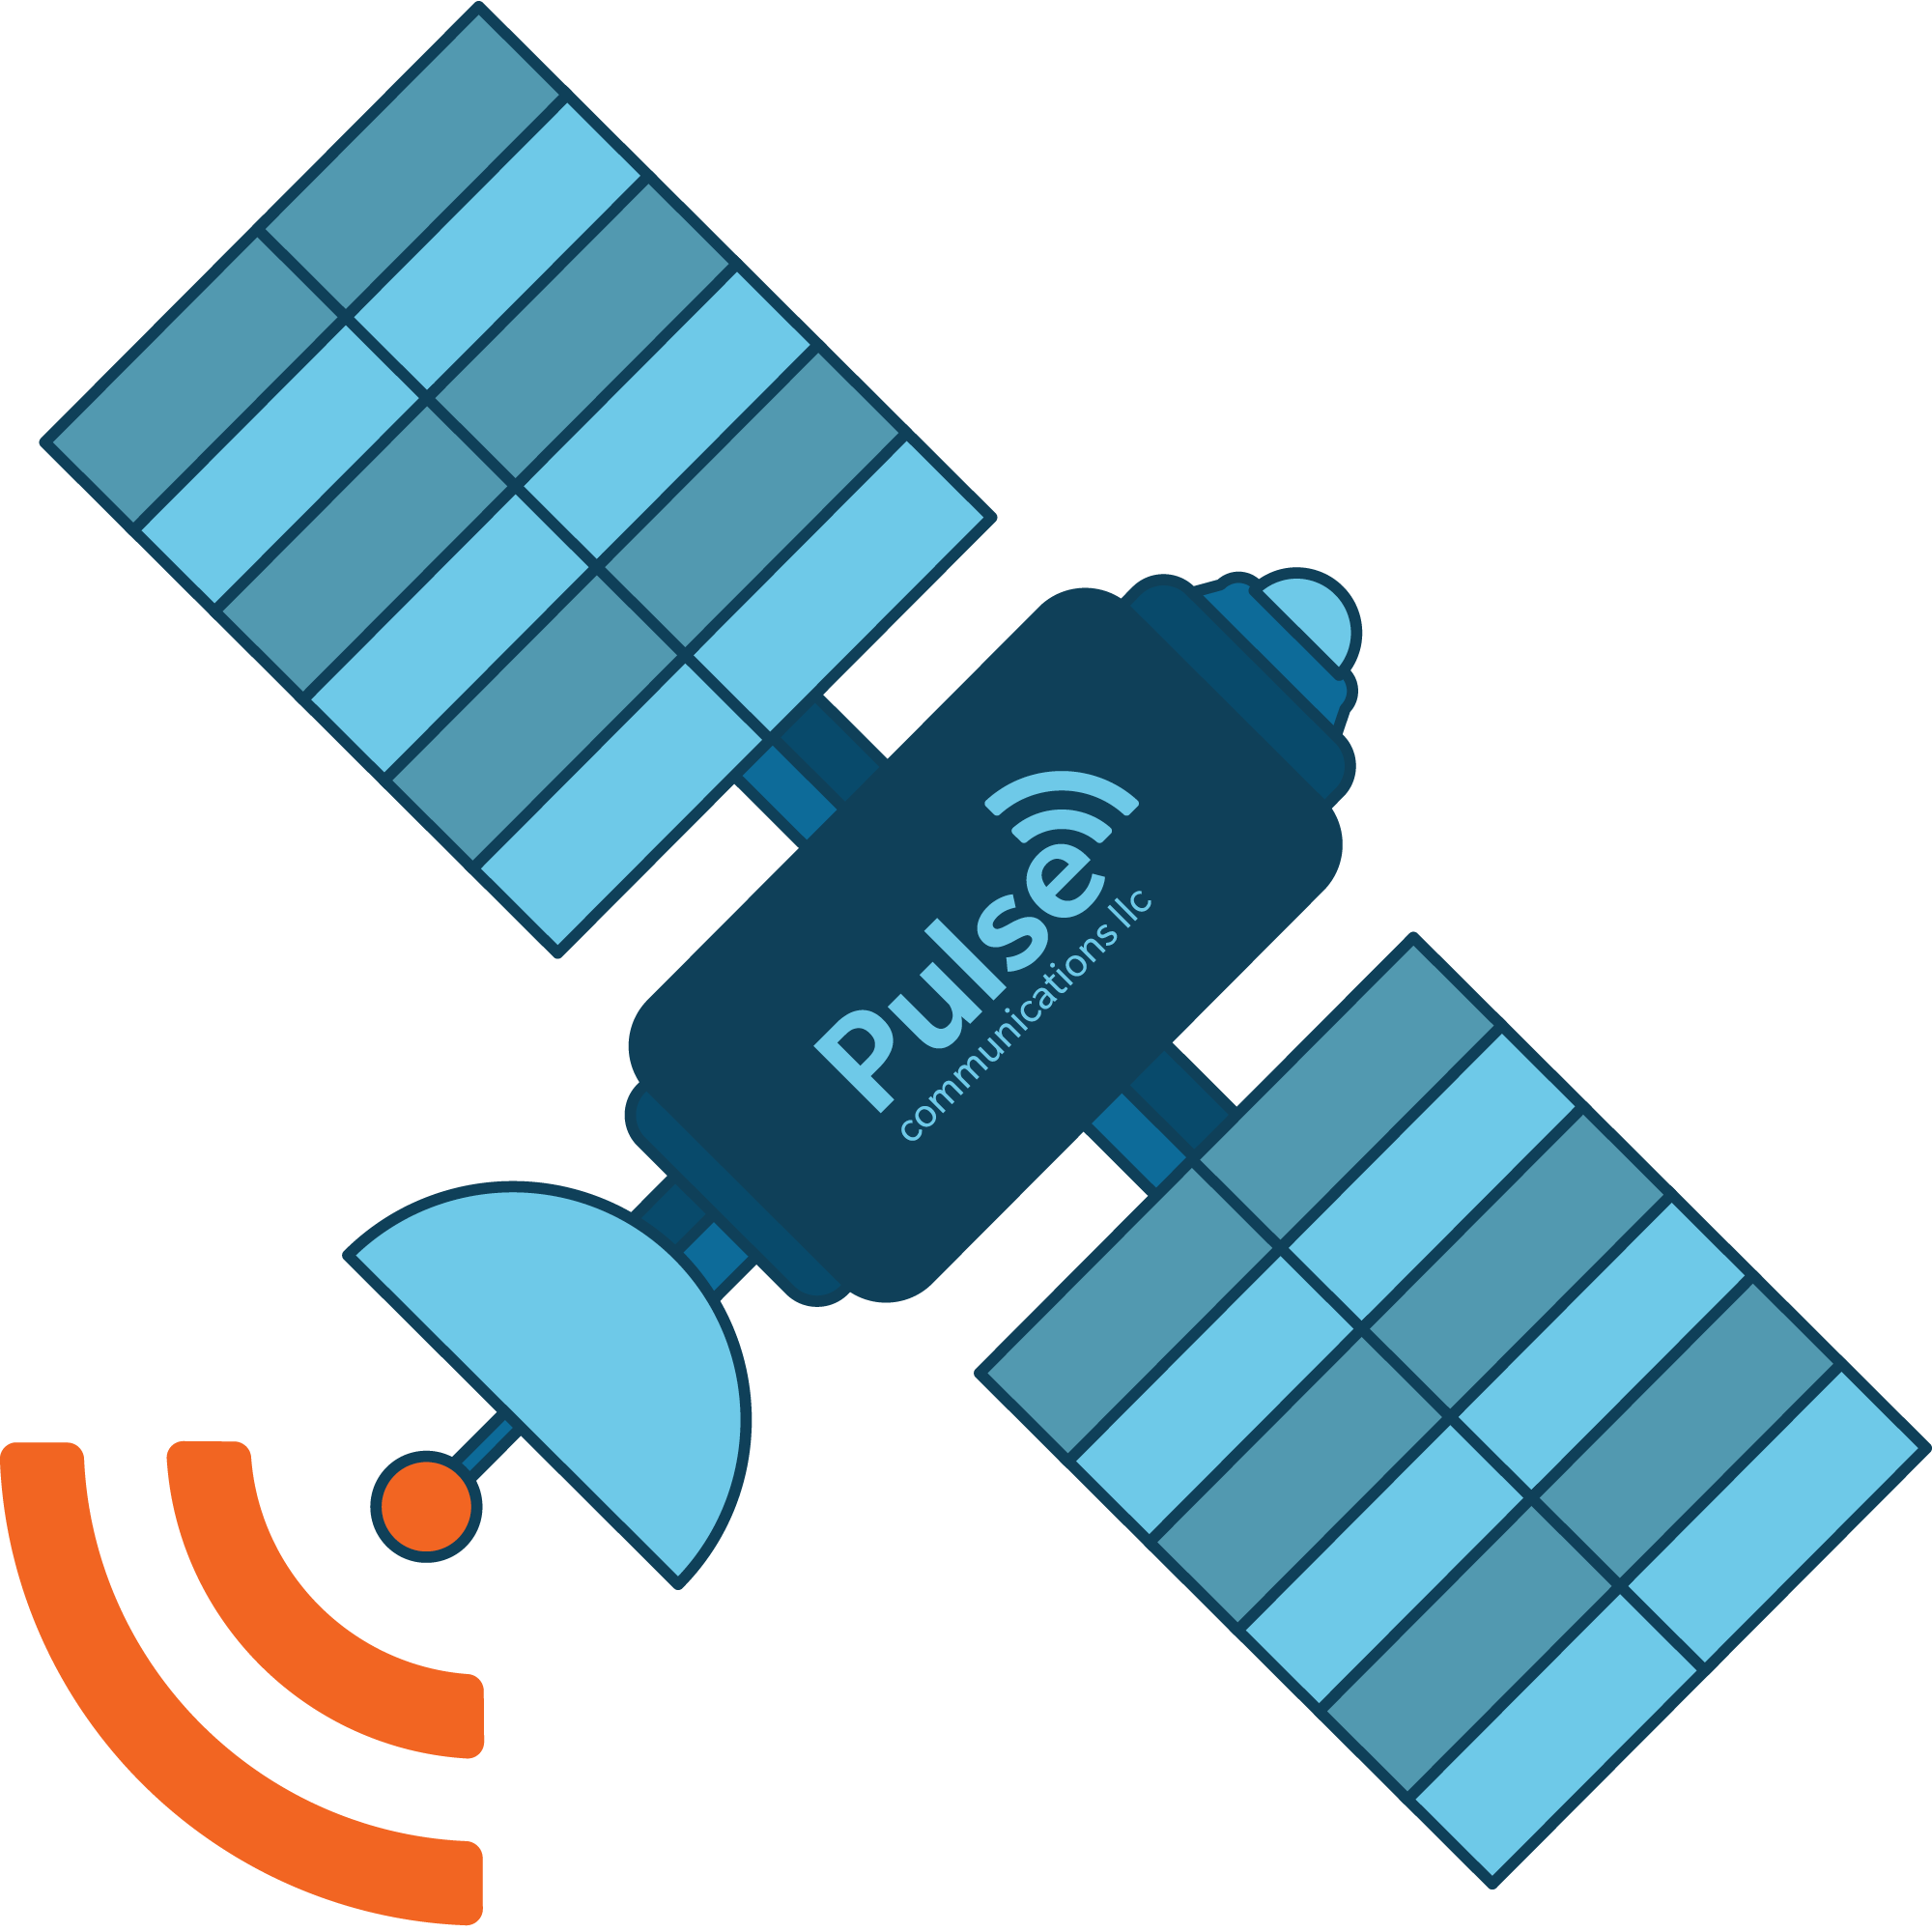 Space based satellite dish graphic with Pulse Communications branding on the side